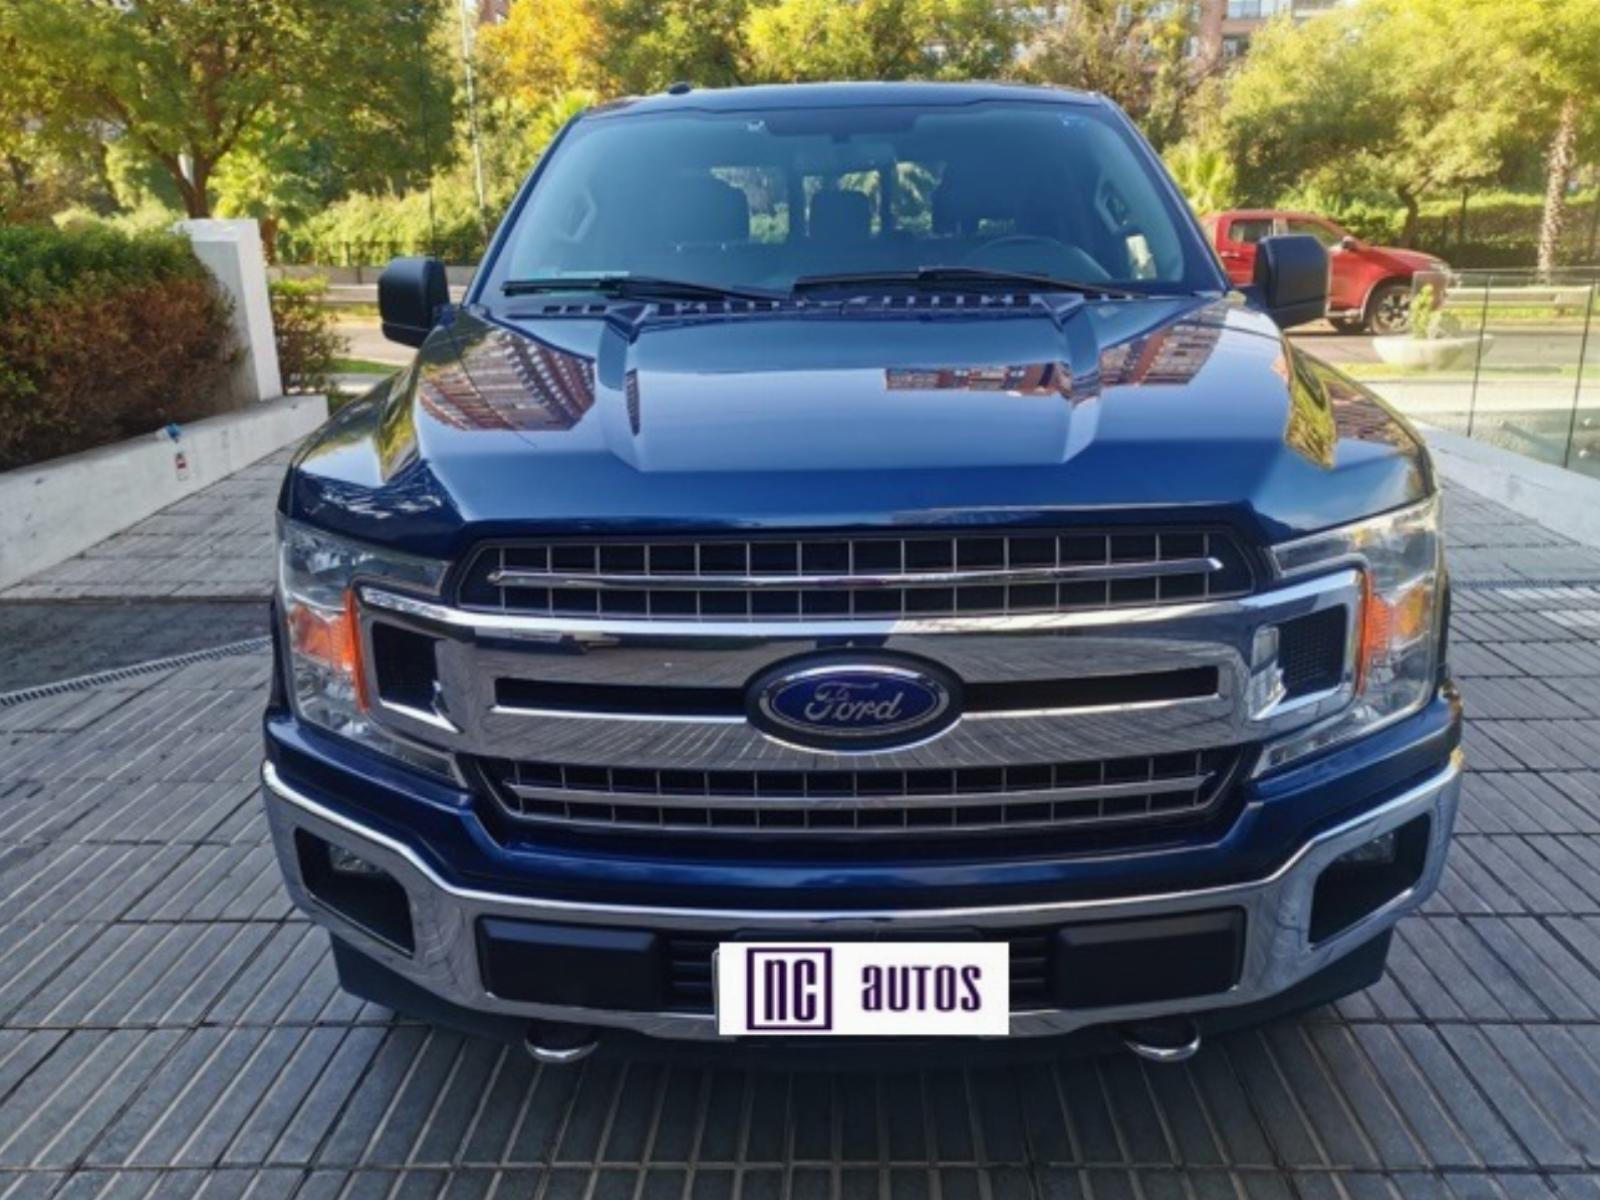 FORD F-150 5.0 Double Cab XLT 4WD 2019 Excelente Oportunidad - FULL MOTOR